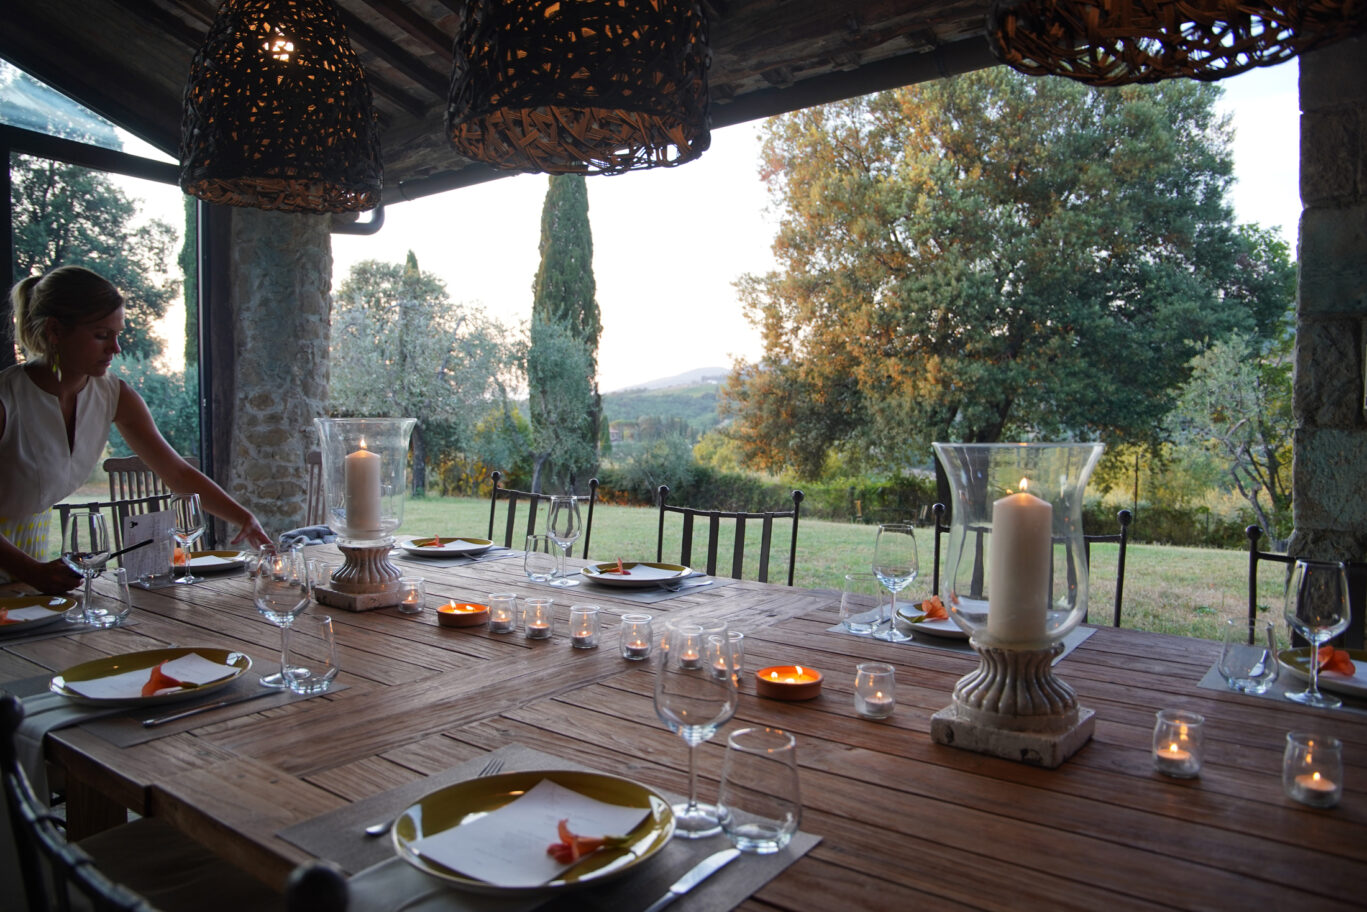 Setting up for dinner Tuscany